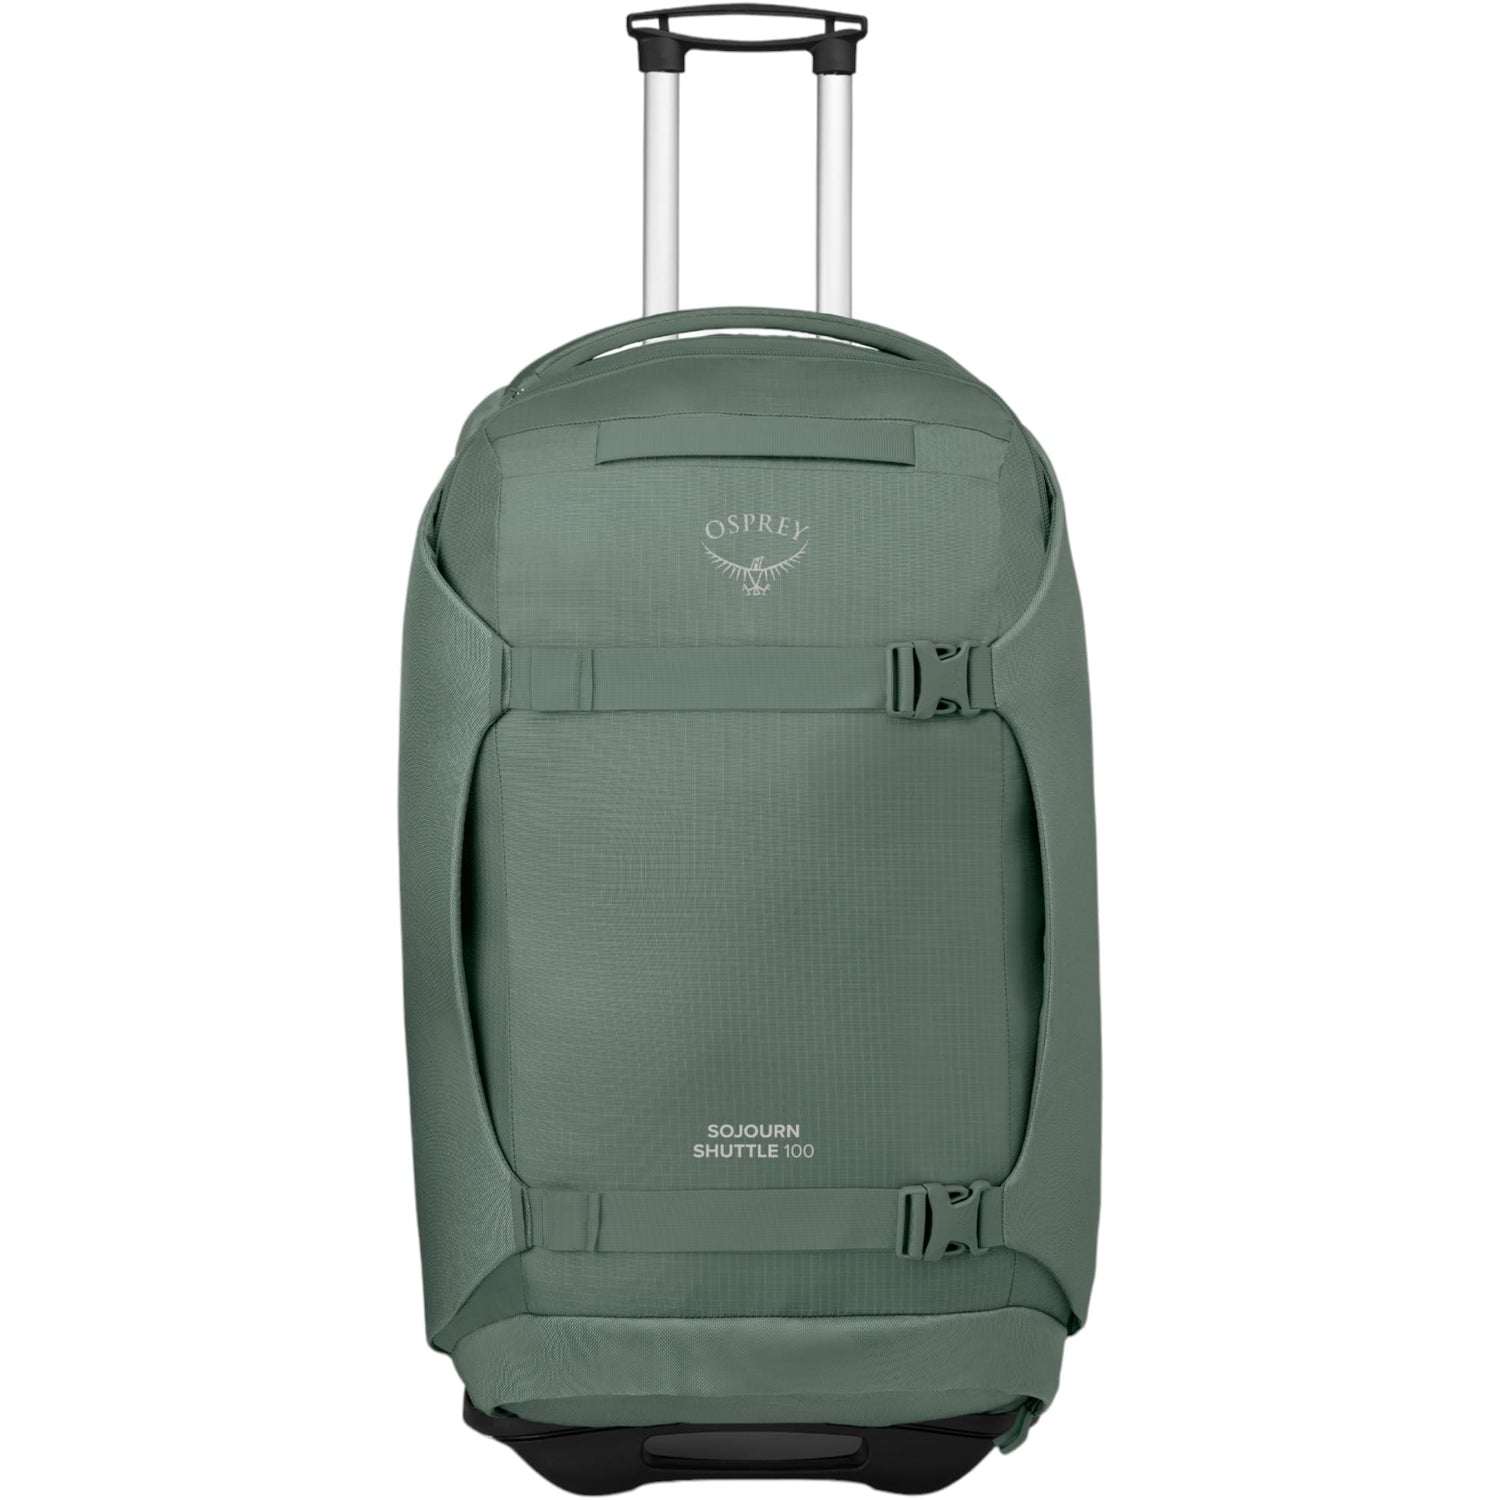 Sojourn Shuttle Wheeled Duffel 30"/100L Suitcase